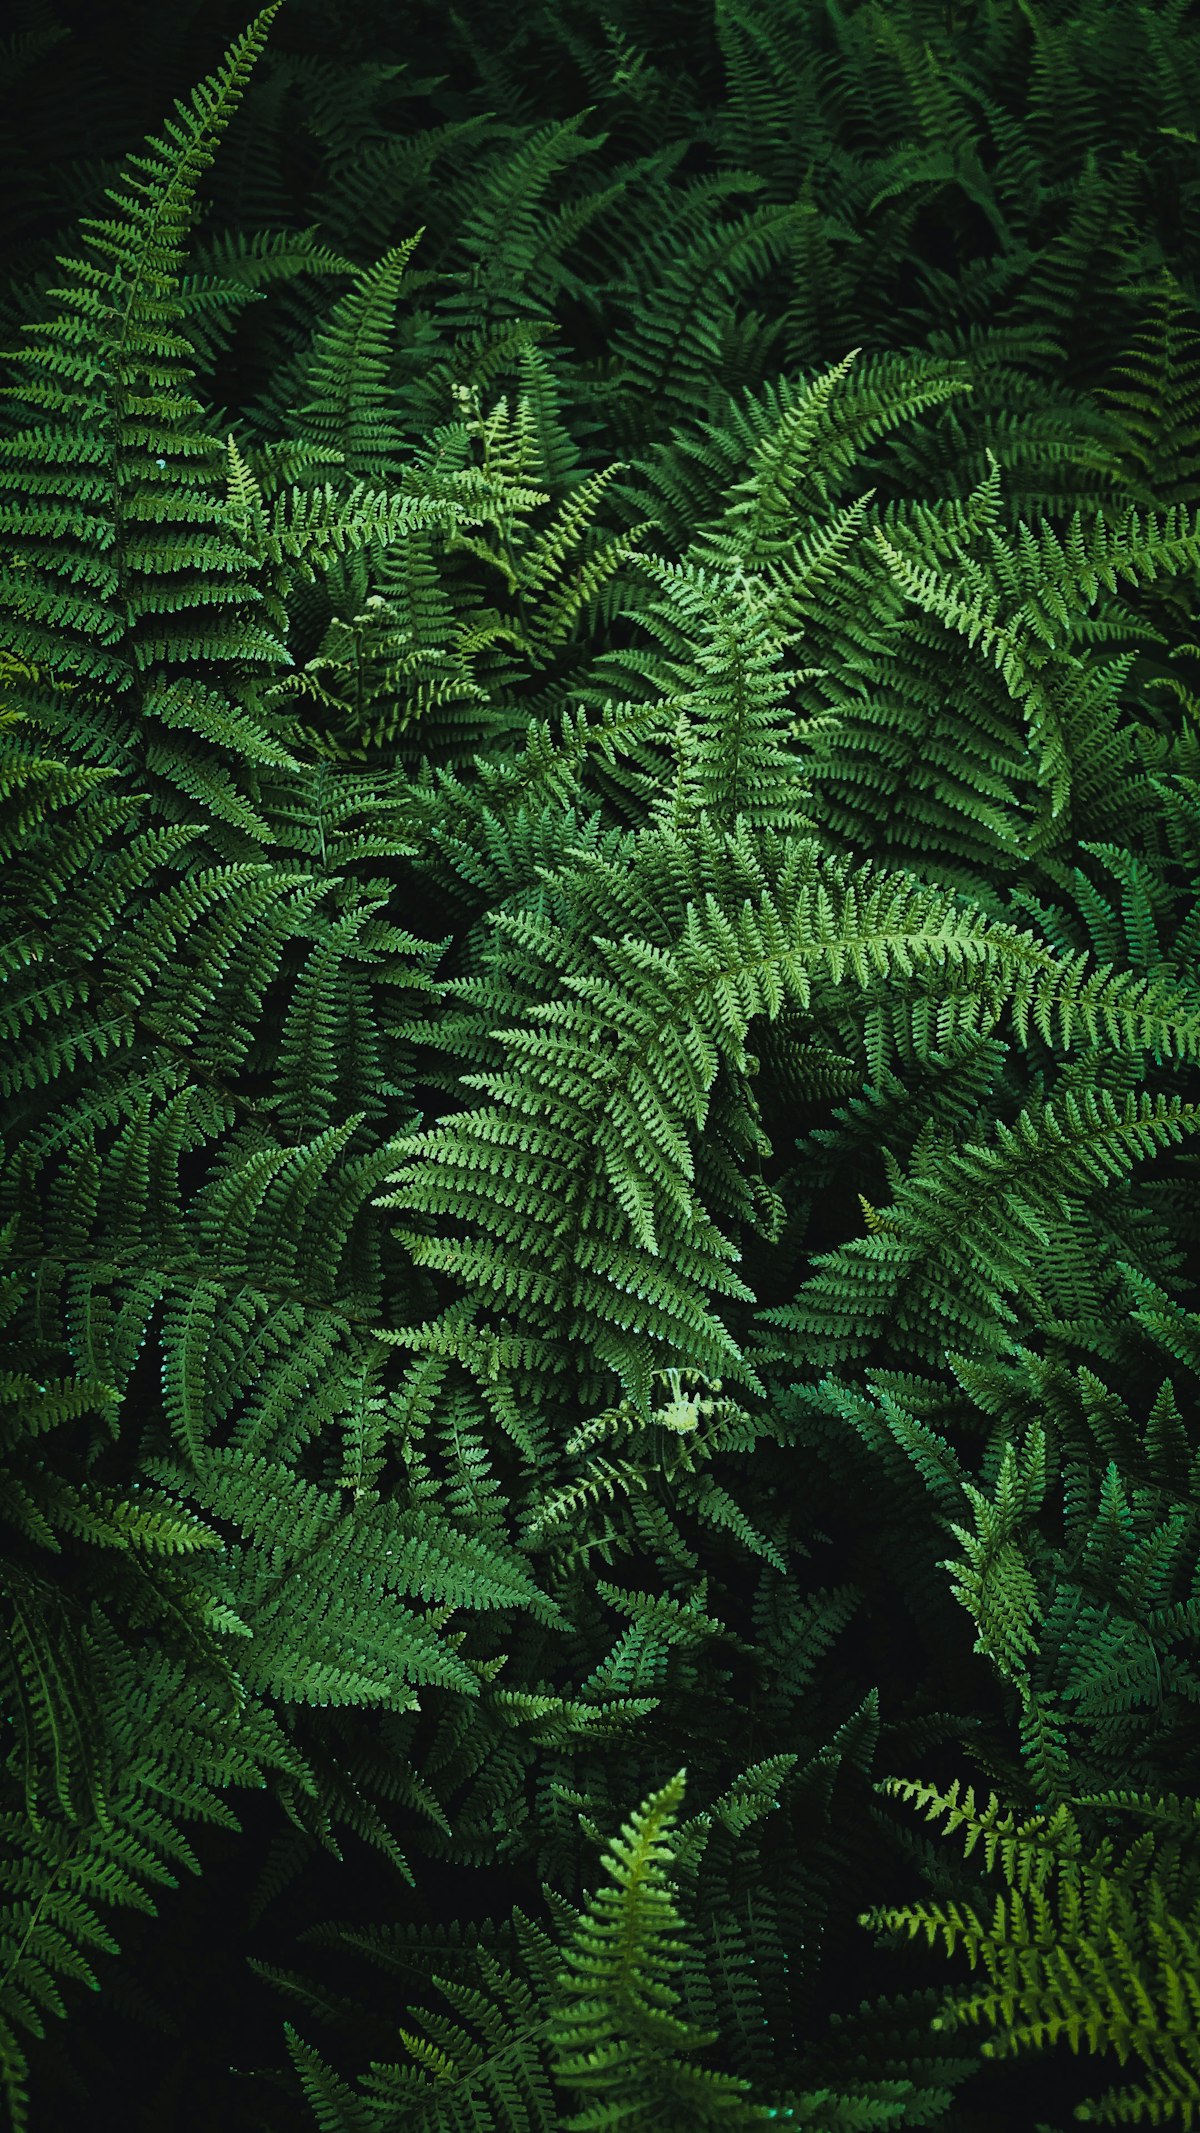 Ferns Unearthed: The Intricate Life Cycle of an Ancient Plant